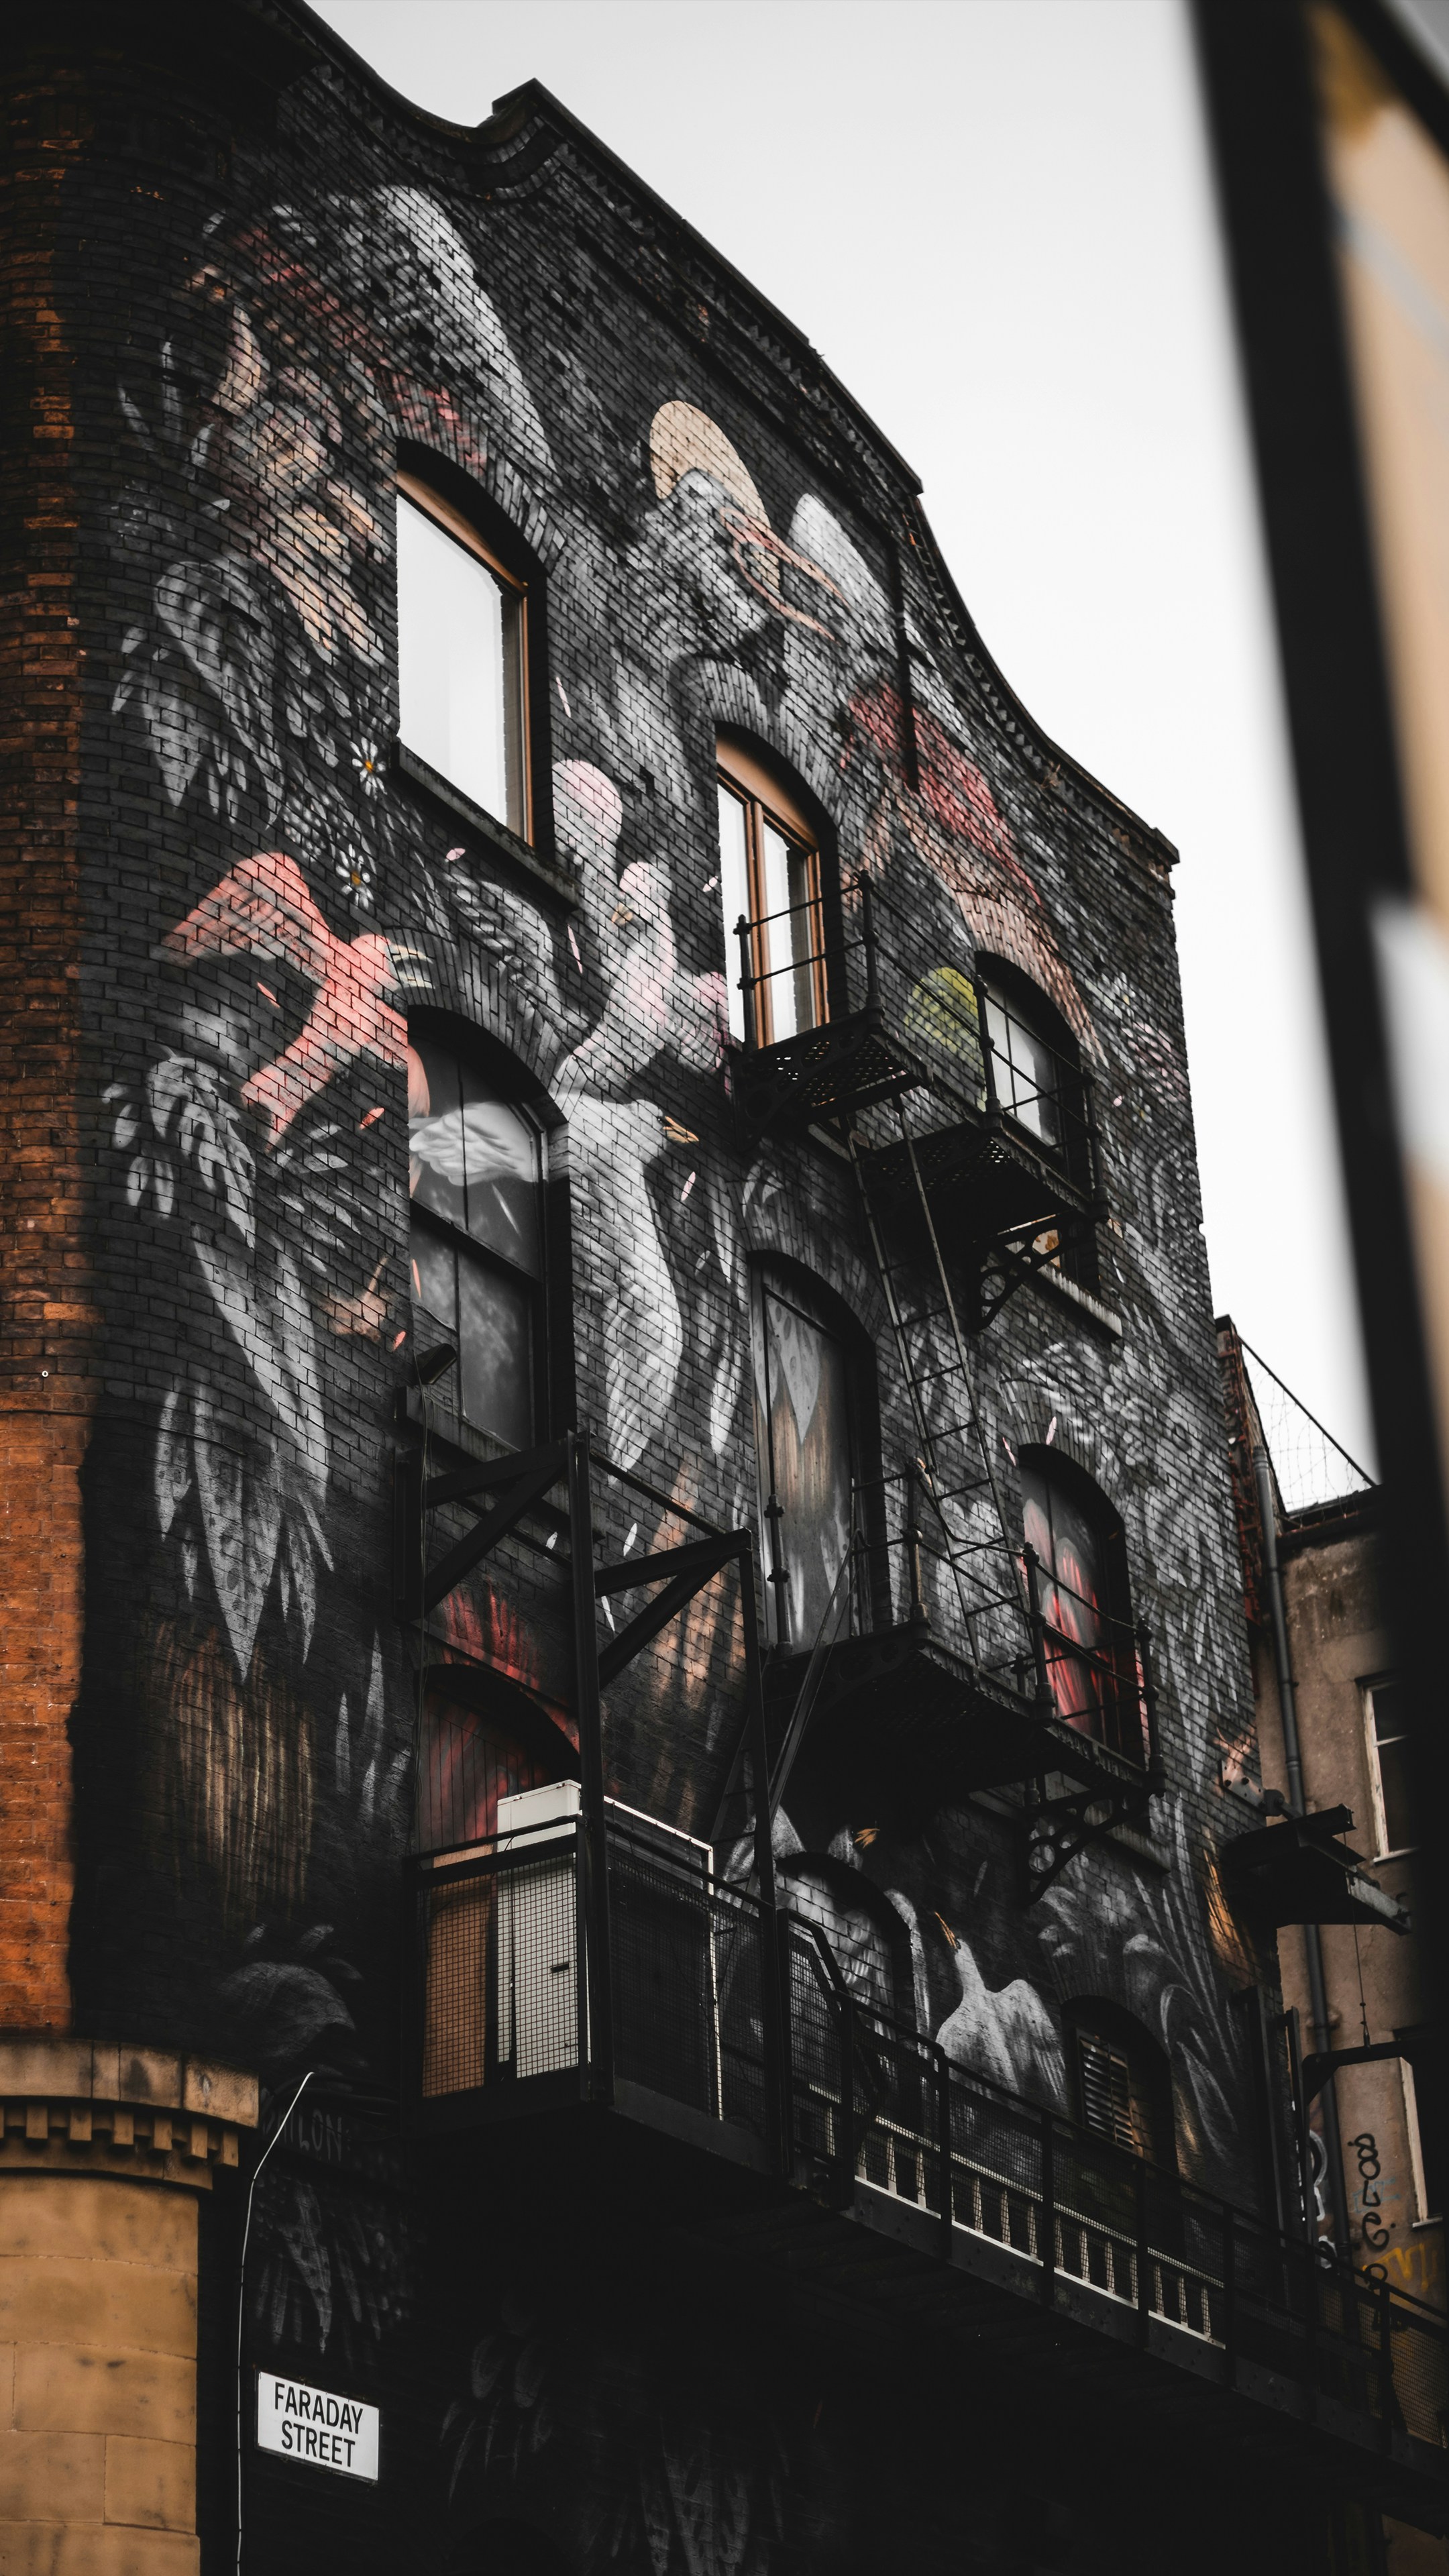 Grafitti is the art of the streets, and now you can bring it to your mobile or desktop with a super dope graffiti wallpaper. 100% free on Unsplash.